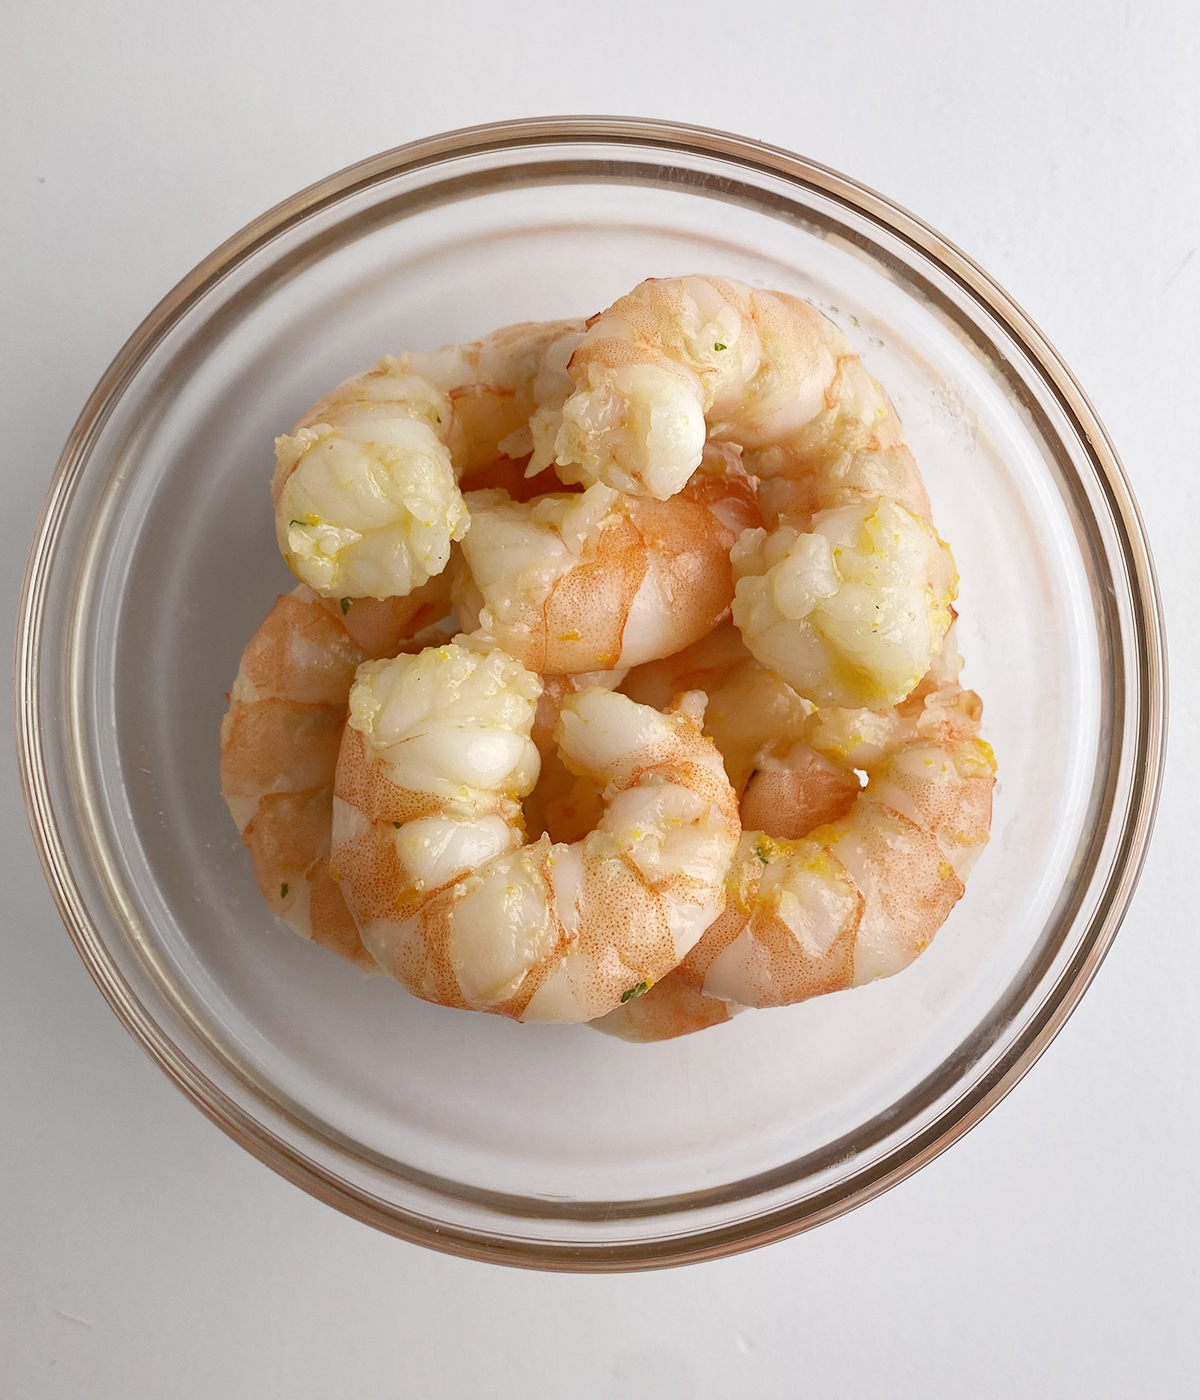 Cooked and cooled shrimp in a bowl.